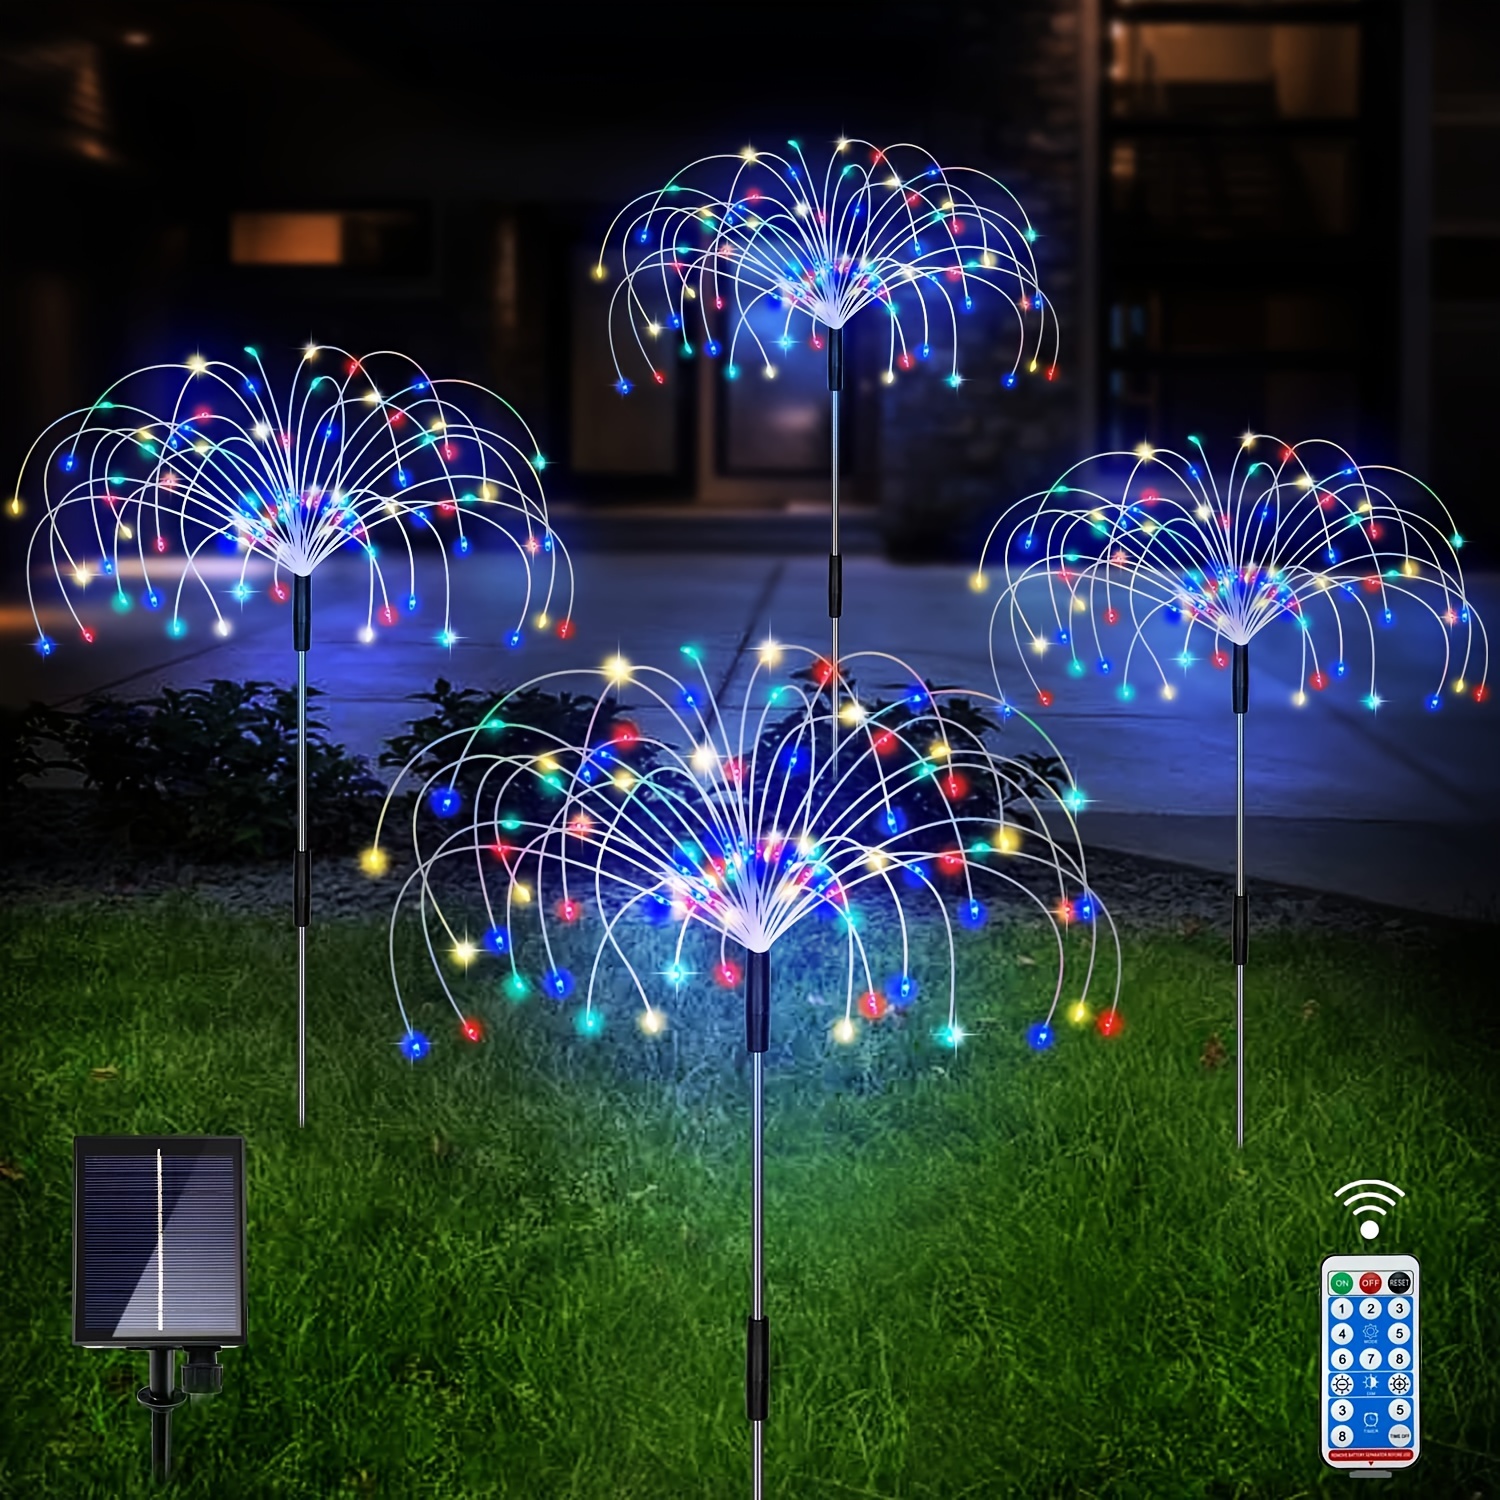 

Fireworks Solar Lights Outdoor 4 Pack 480 Led Pathway Lights Solar Powered Starburst Fairy Lights Waterproof 8 Lighting Modes With Remote Control For Patio Christmas Yard Decorative